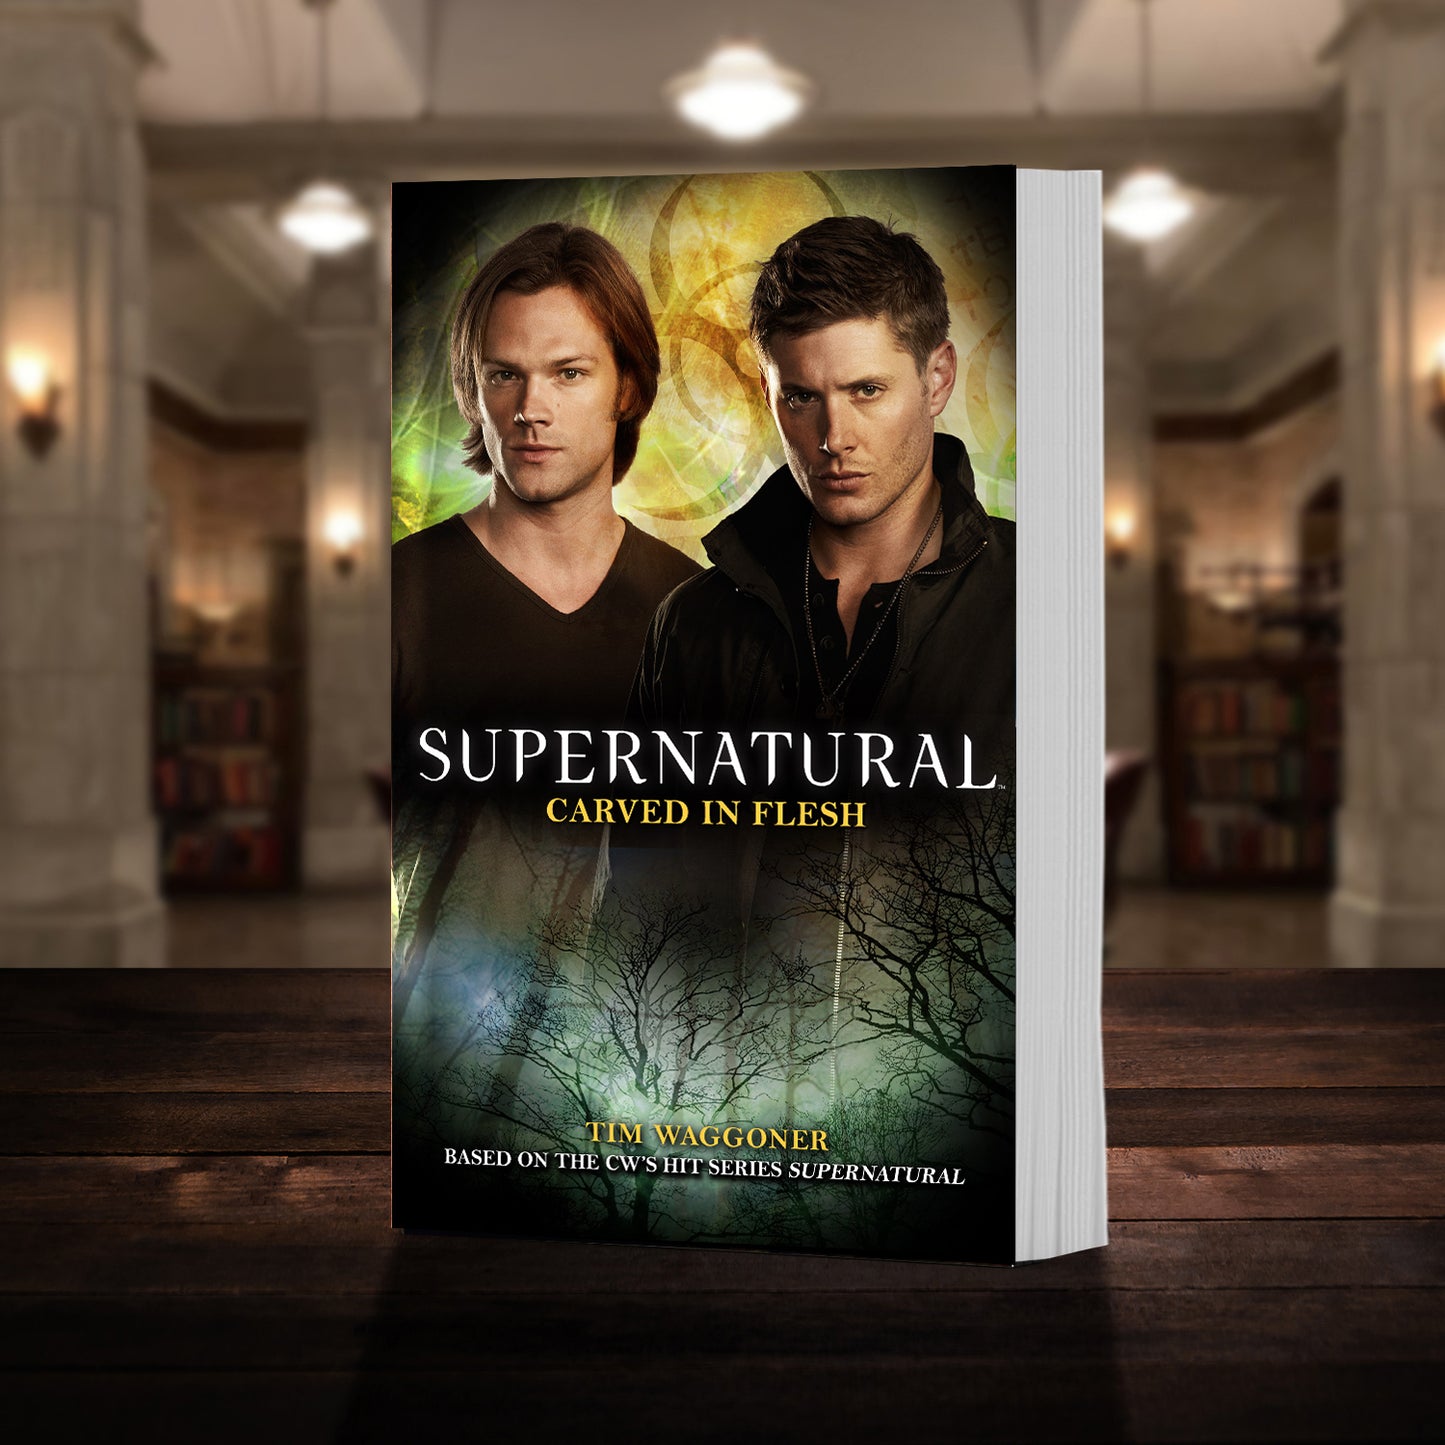 A copy of the book "Supernatural: Carved in Flesh" pictured in the "bunker" from Supernatural. The cover shows mid-season Sam and Dean Winchester and reads "Tim Waggoner - Supernatural Carved in Flesh - Based on the hit CW series SUPERNATURAL”